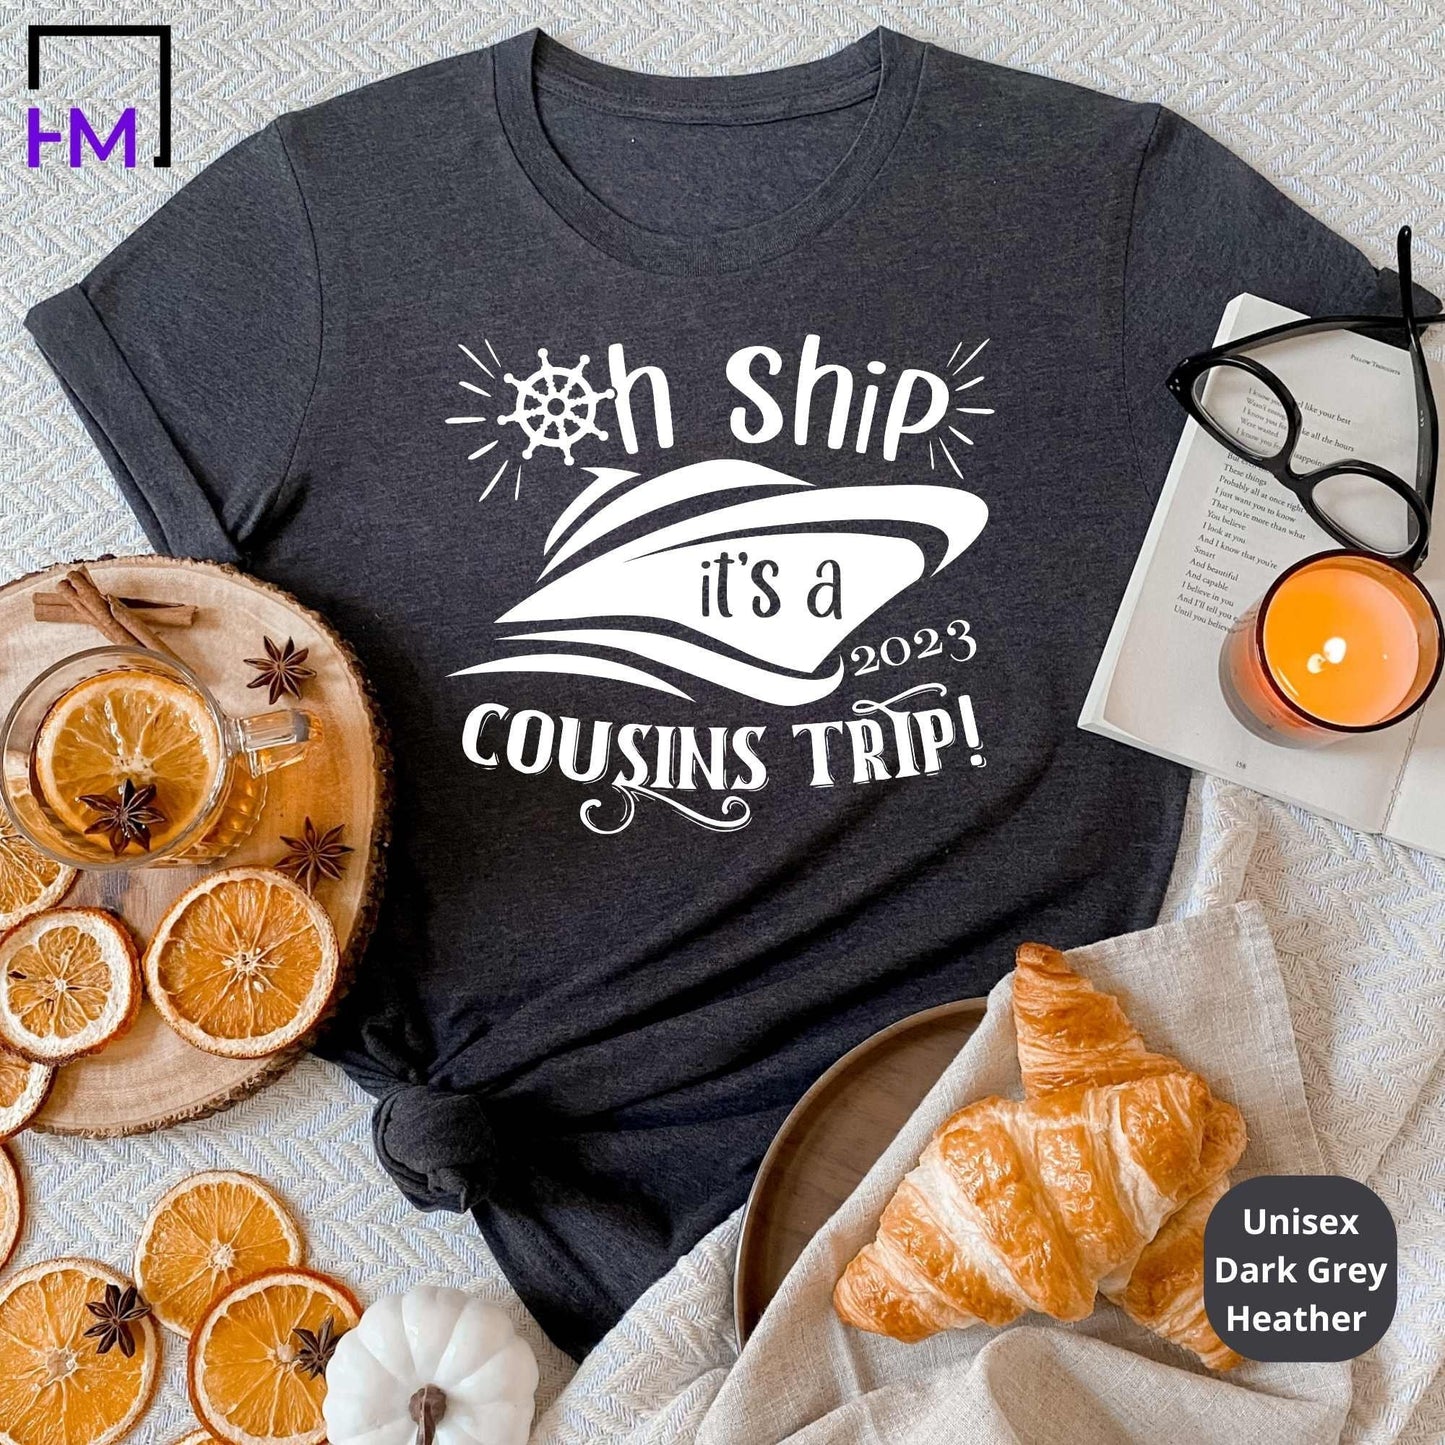 Cousin Crew Shirts, 2023 Cousins Cruise T-shirts, Matching Family Vacation Tees, Cousin gifts, Christmas Cousin Girls or Guys Holiday Trip HMDesignStudioUS